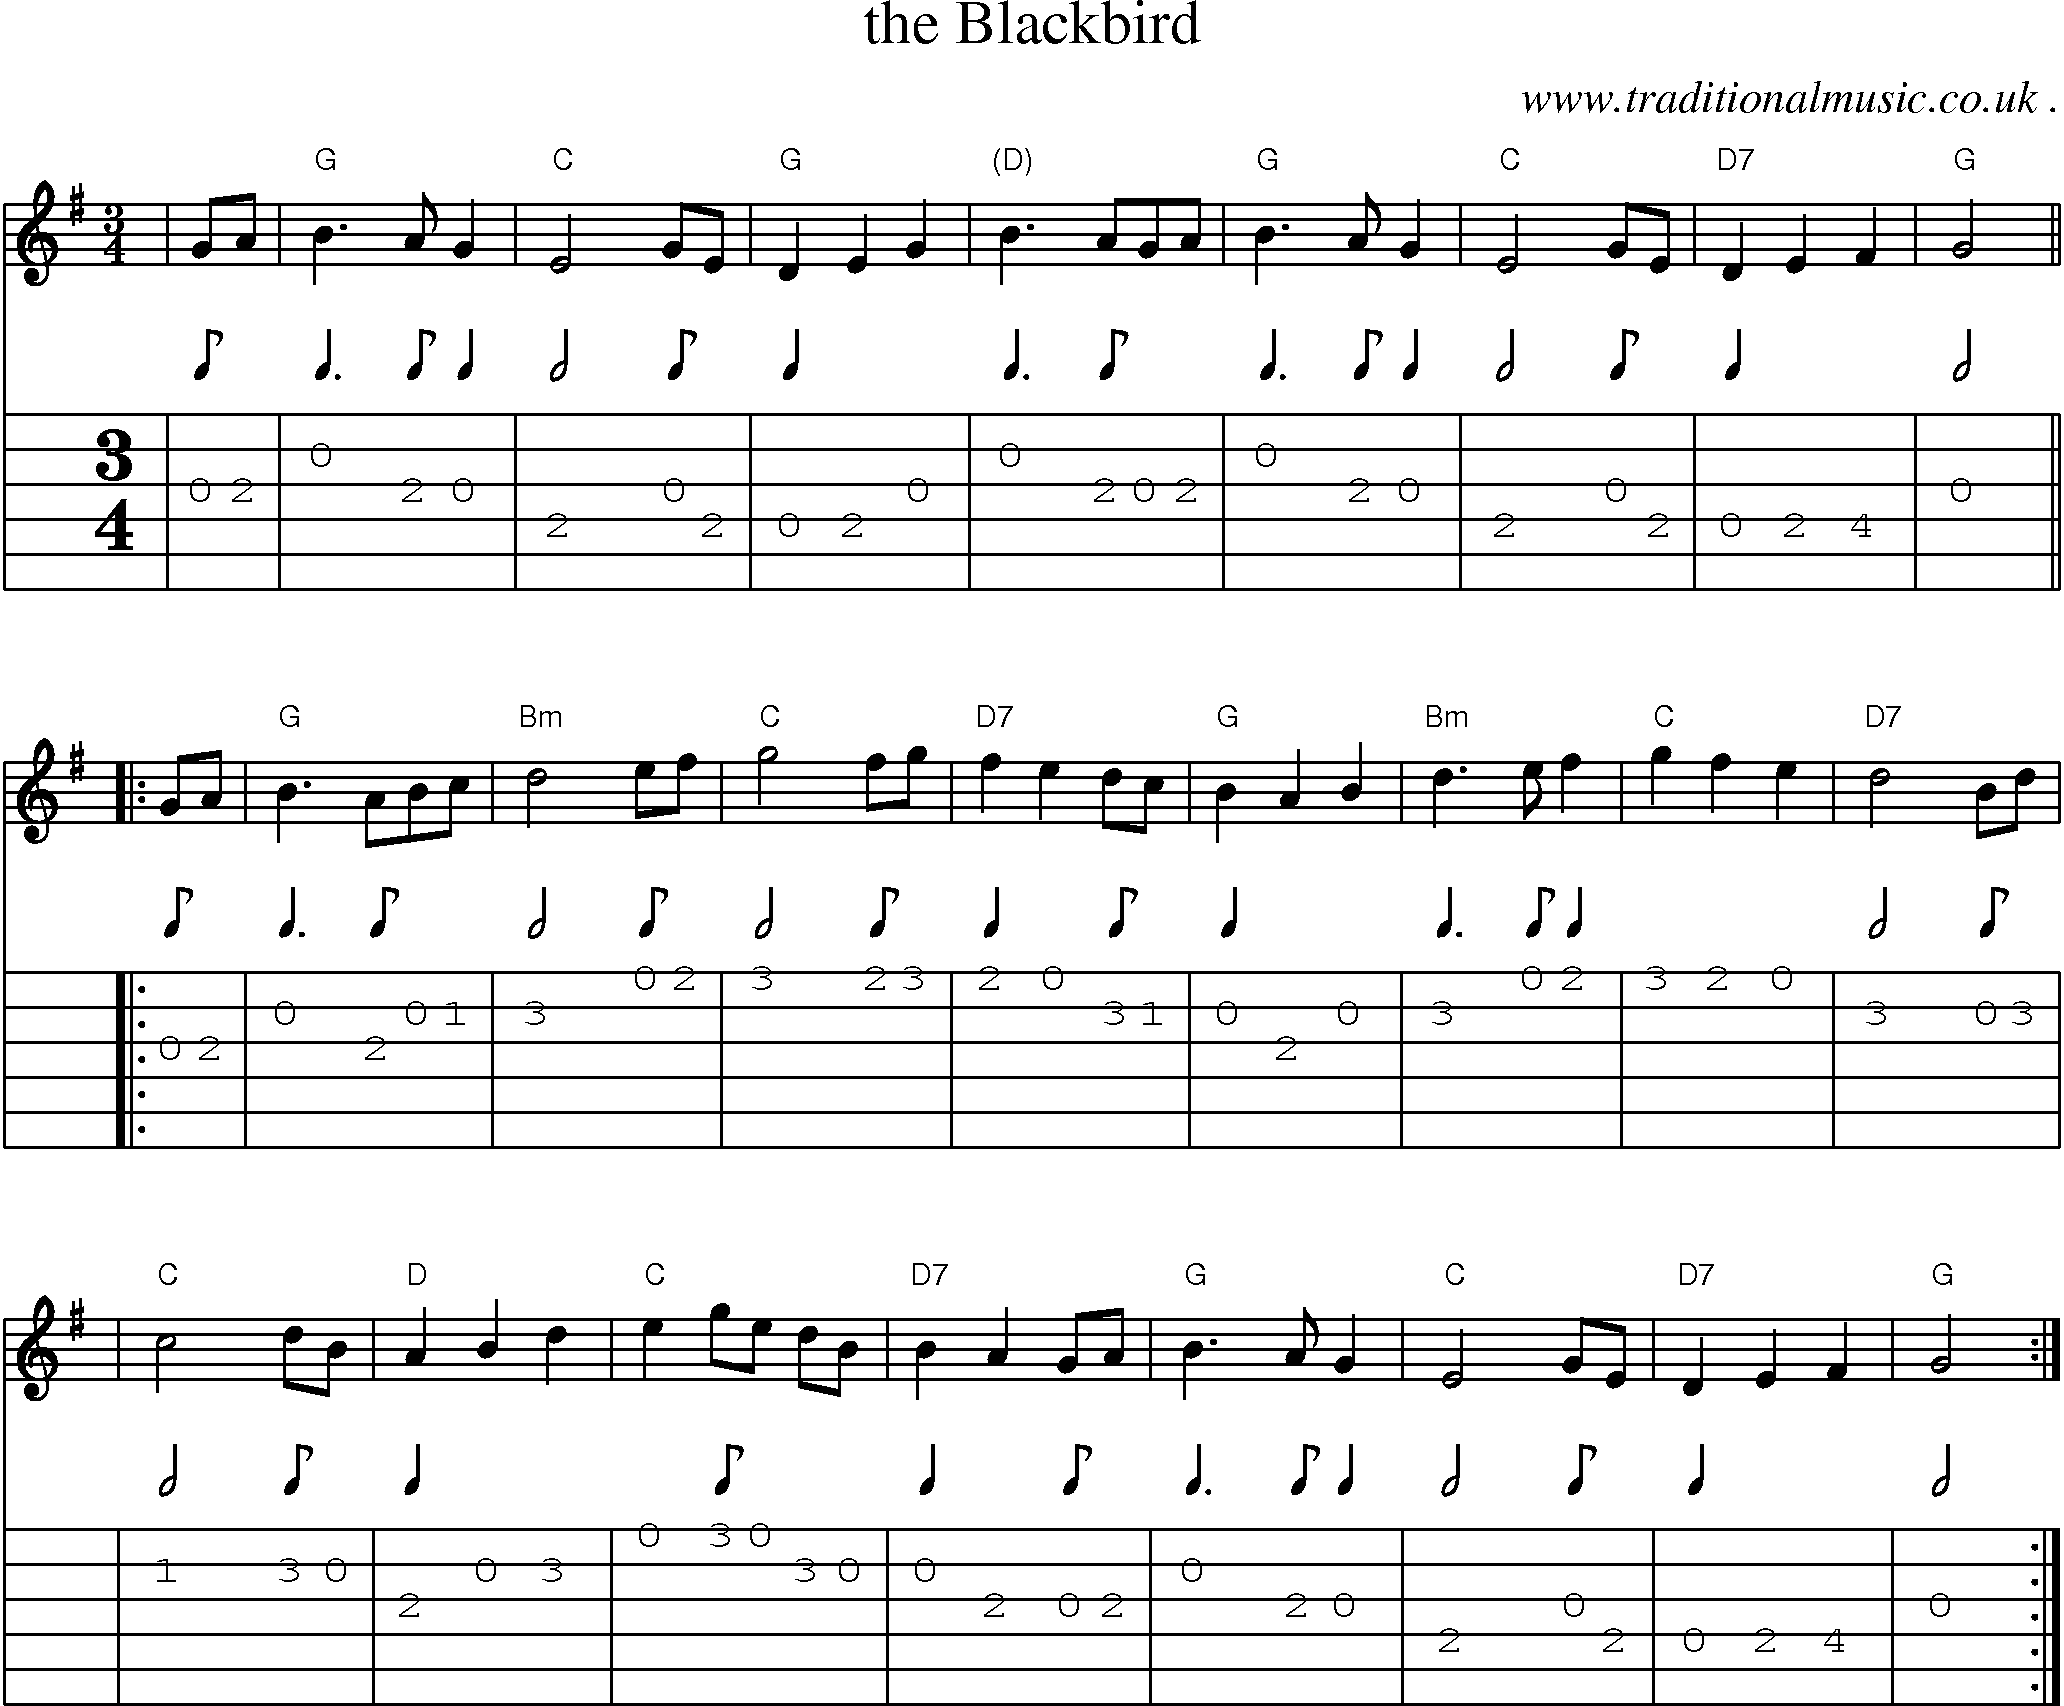 Sheet-music  score, Chords and Guitar Tabs for The Blackbird